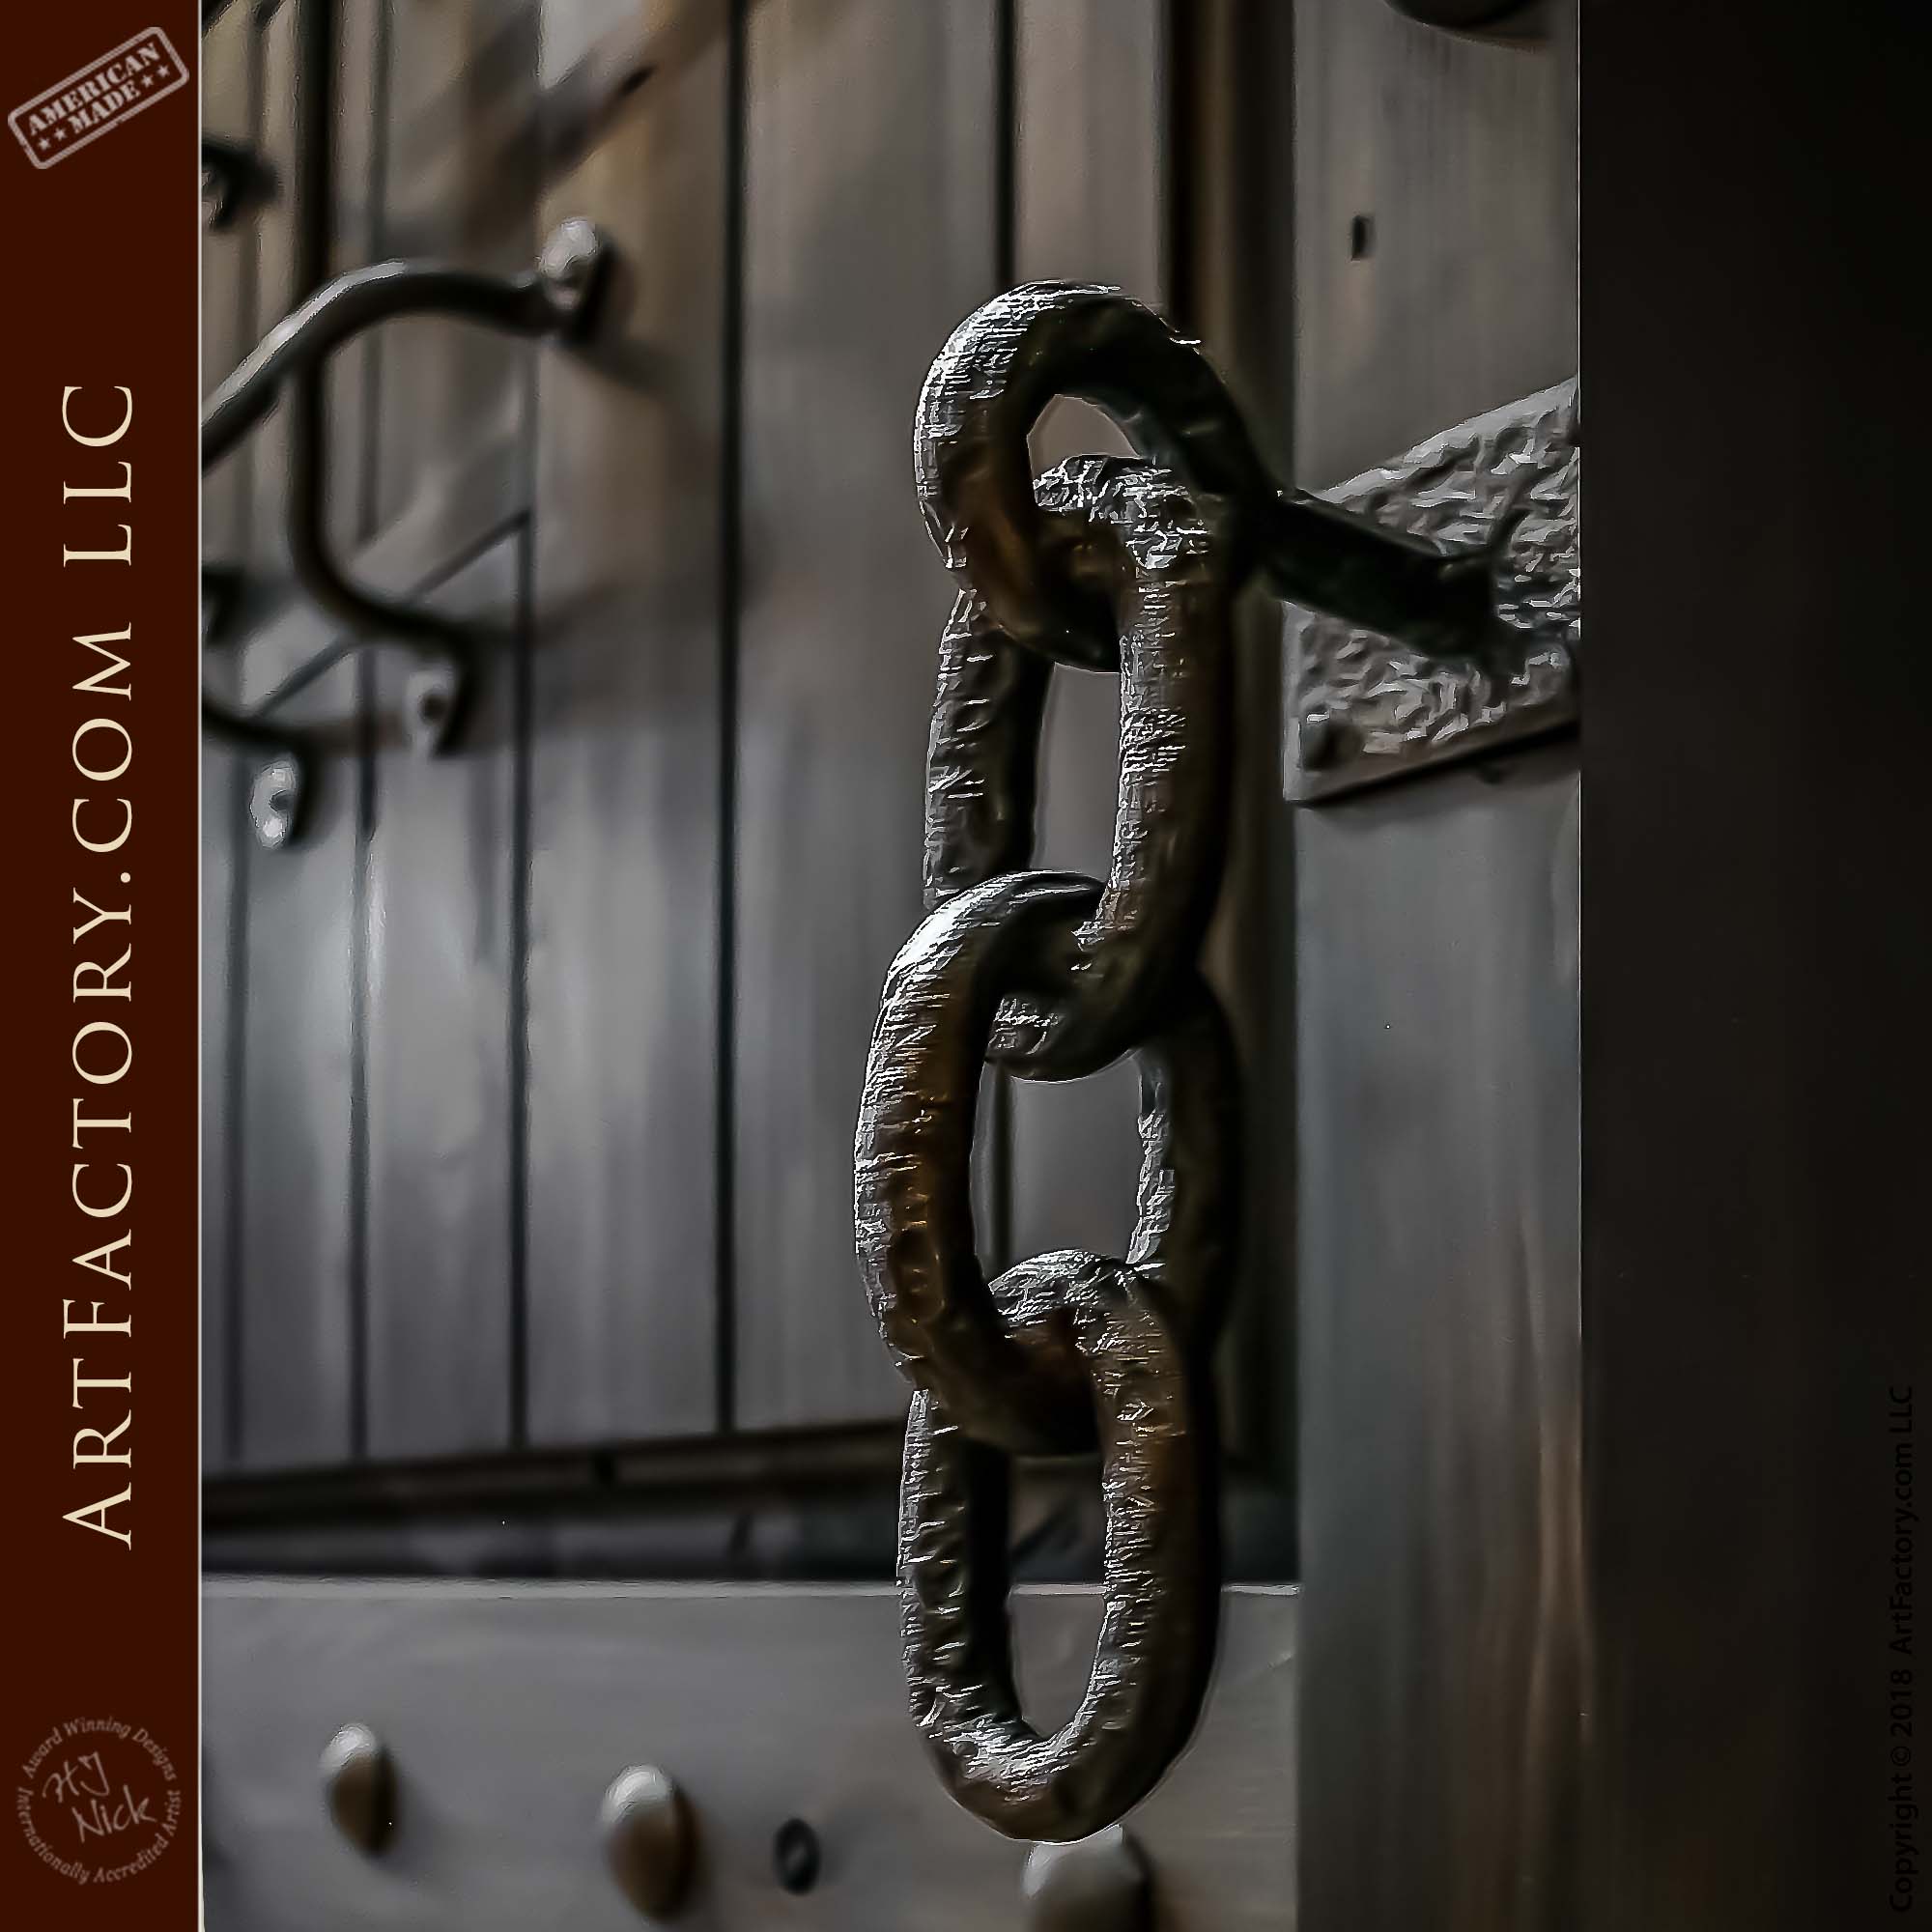 Custom Entry Door with Hand-Forged Iron Chain-Link Pulls